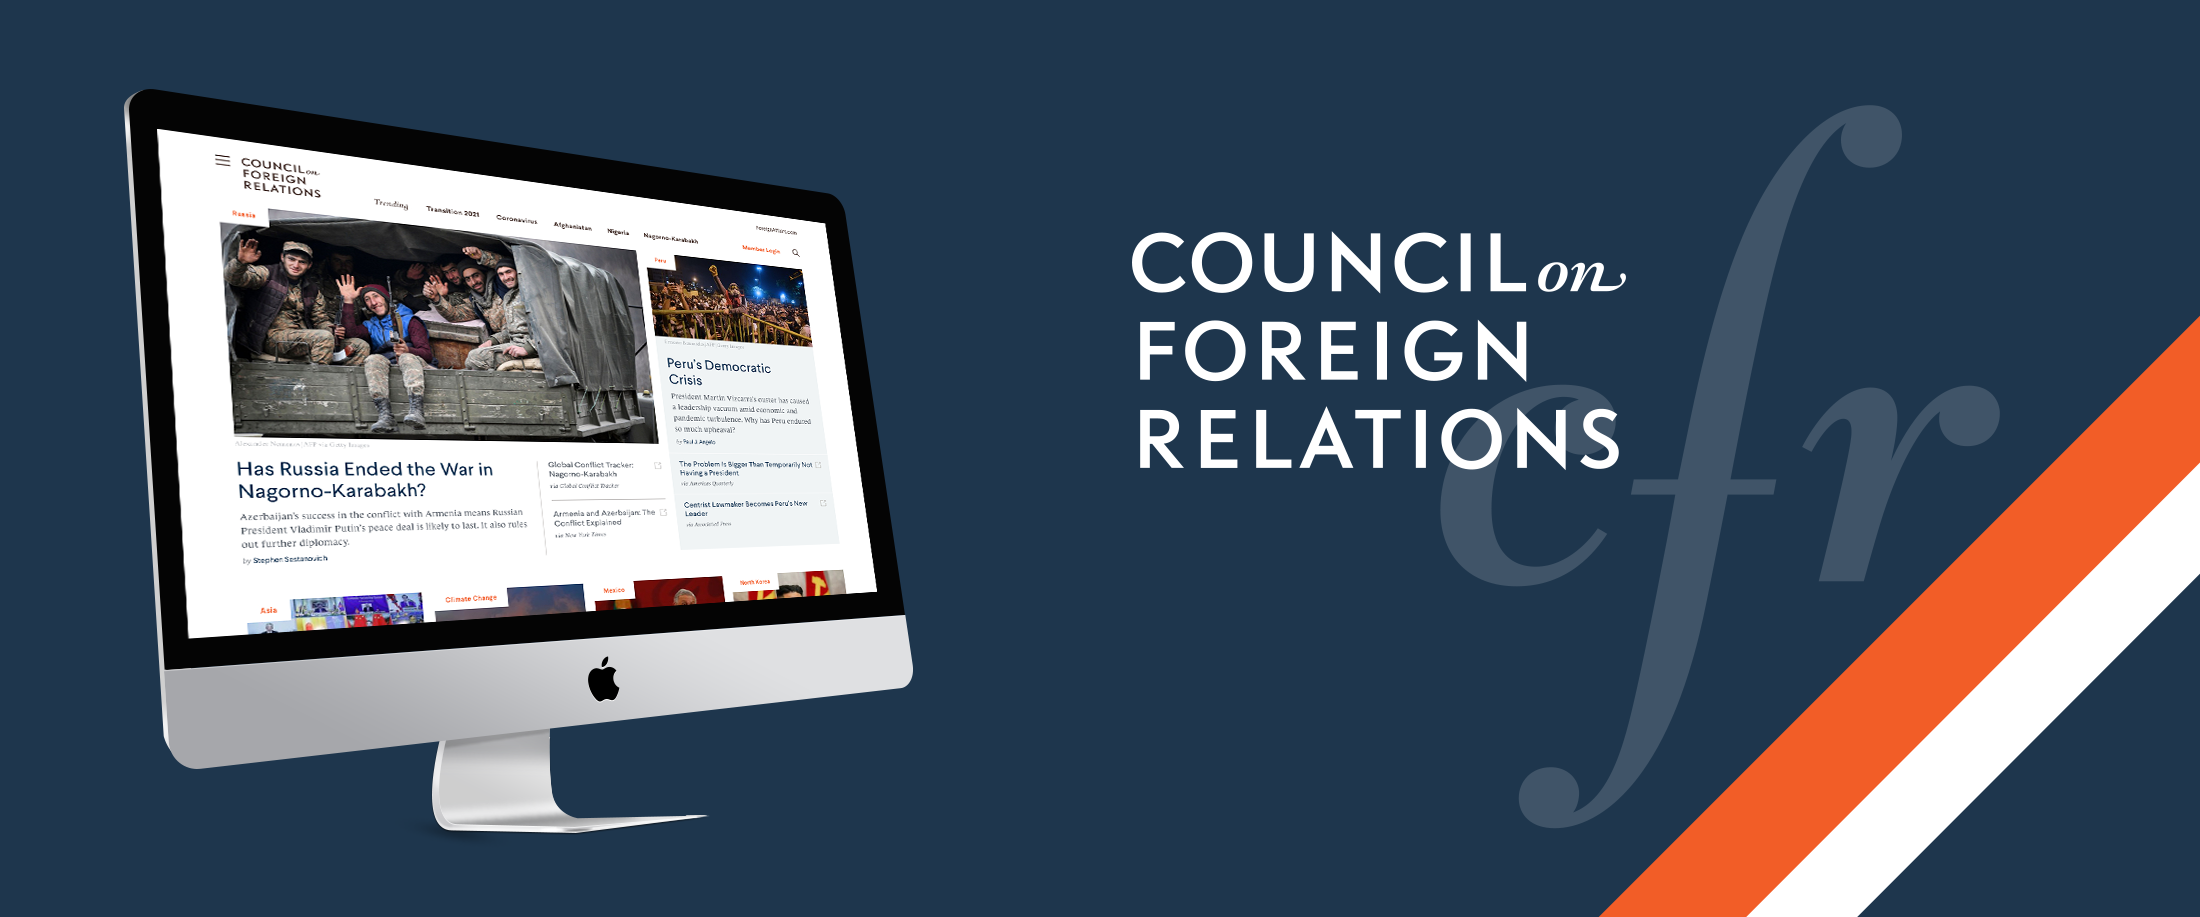 Council on Foreign Relations SJ Innovation LLC